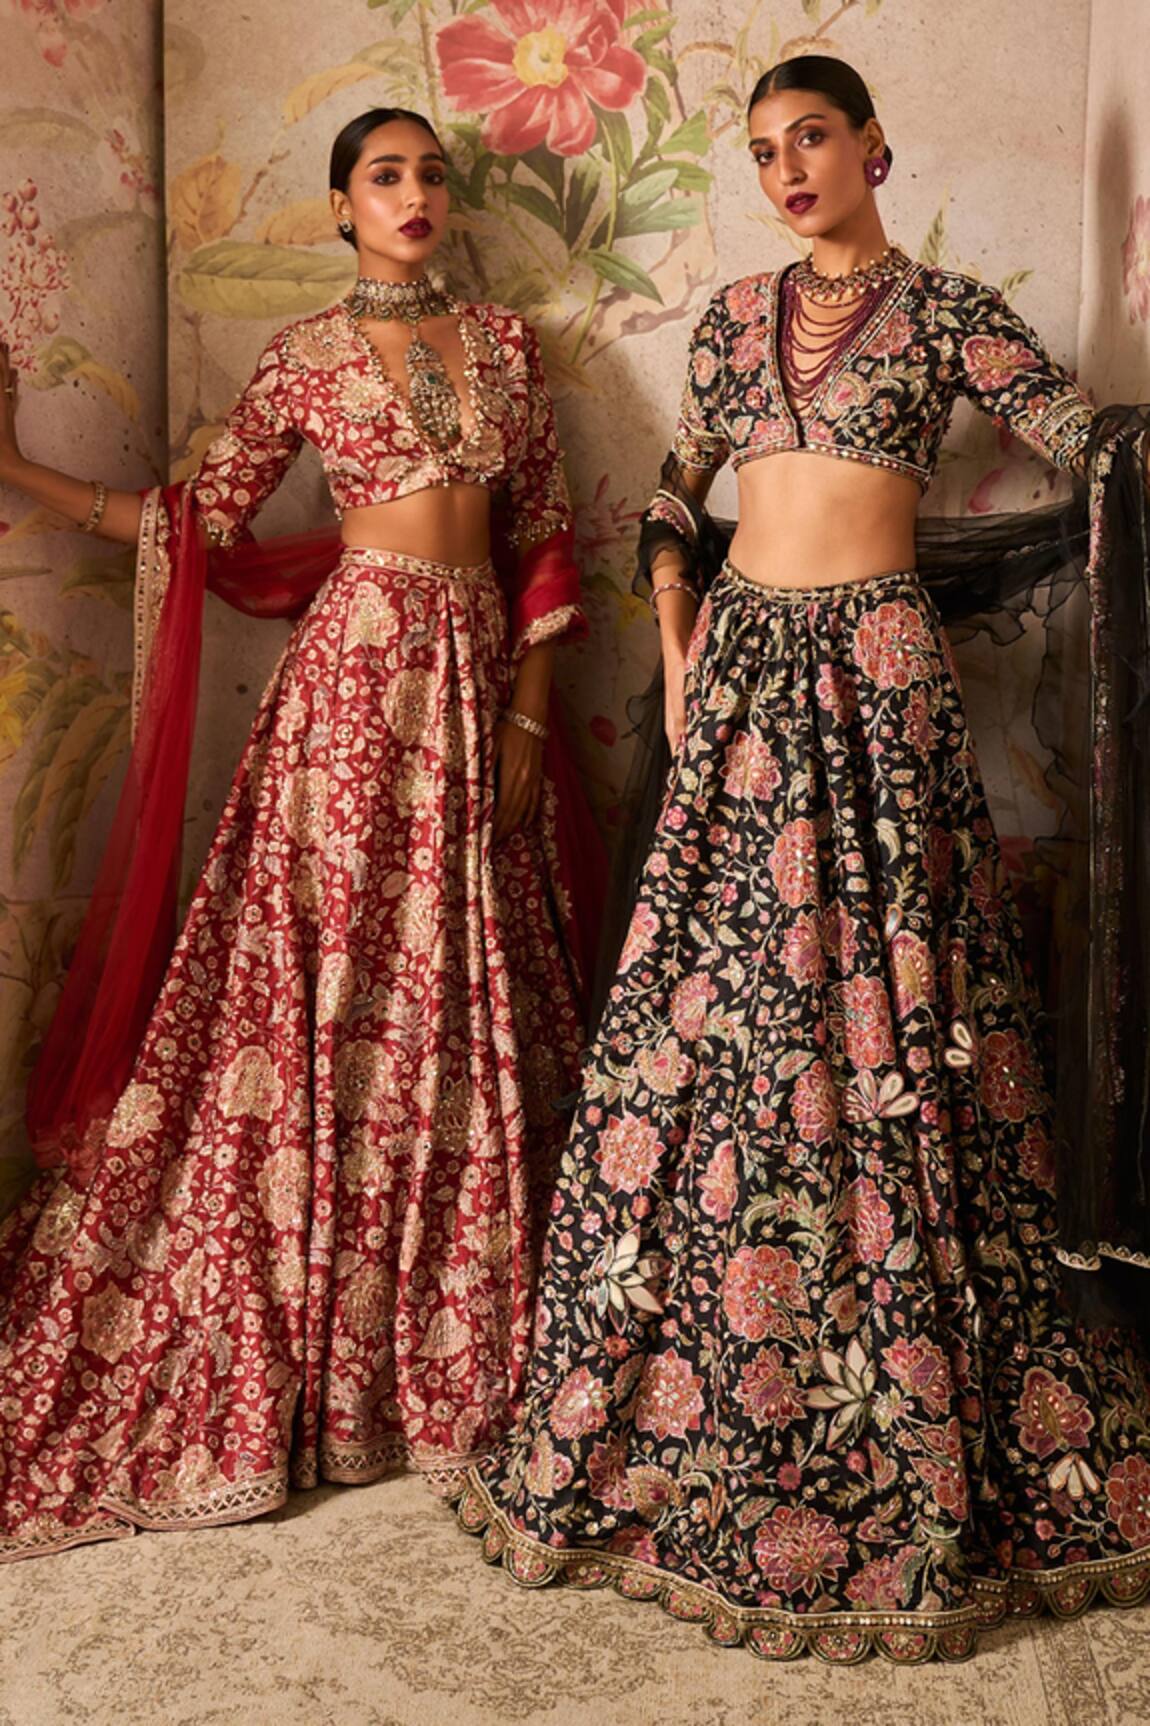 Mirraw - We know everyone loved Karishma Kapoor's beautiful floral lehenga  look and here we are sharing the similar look with you. Available to shop  and style at your best friend's wedding.